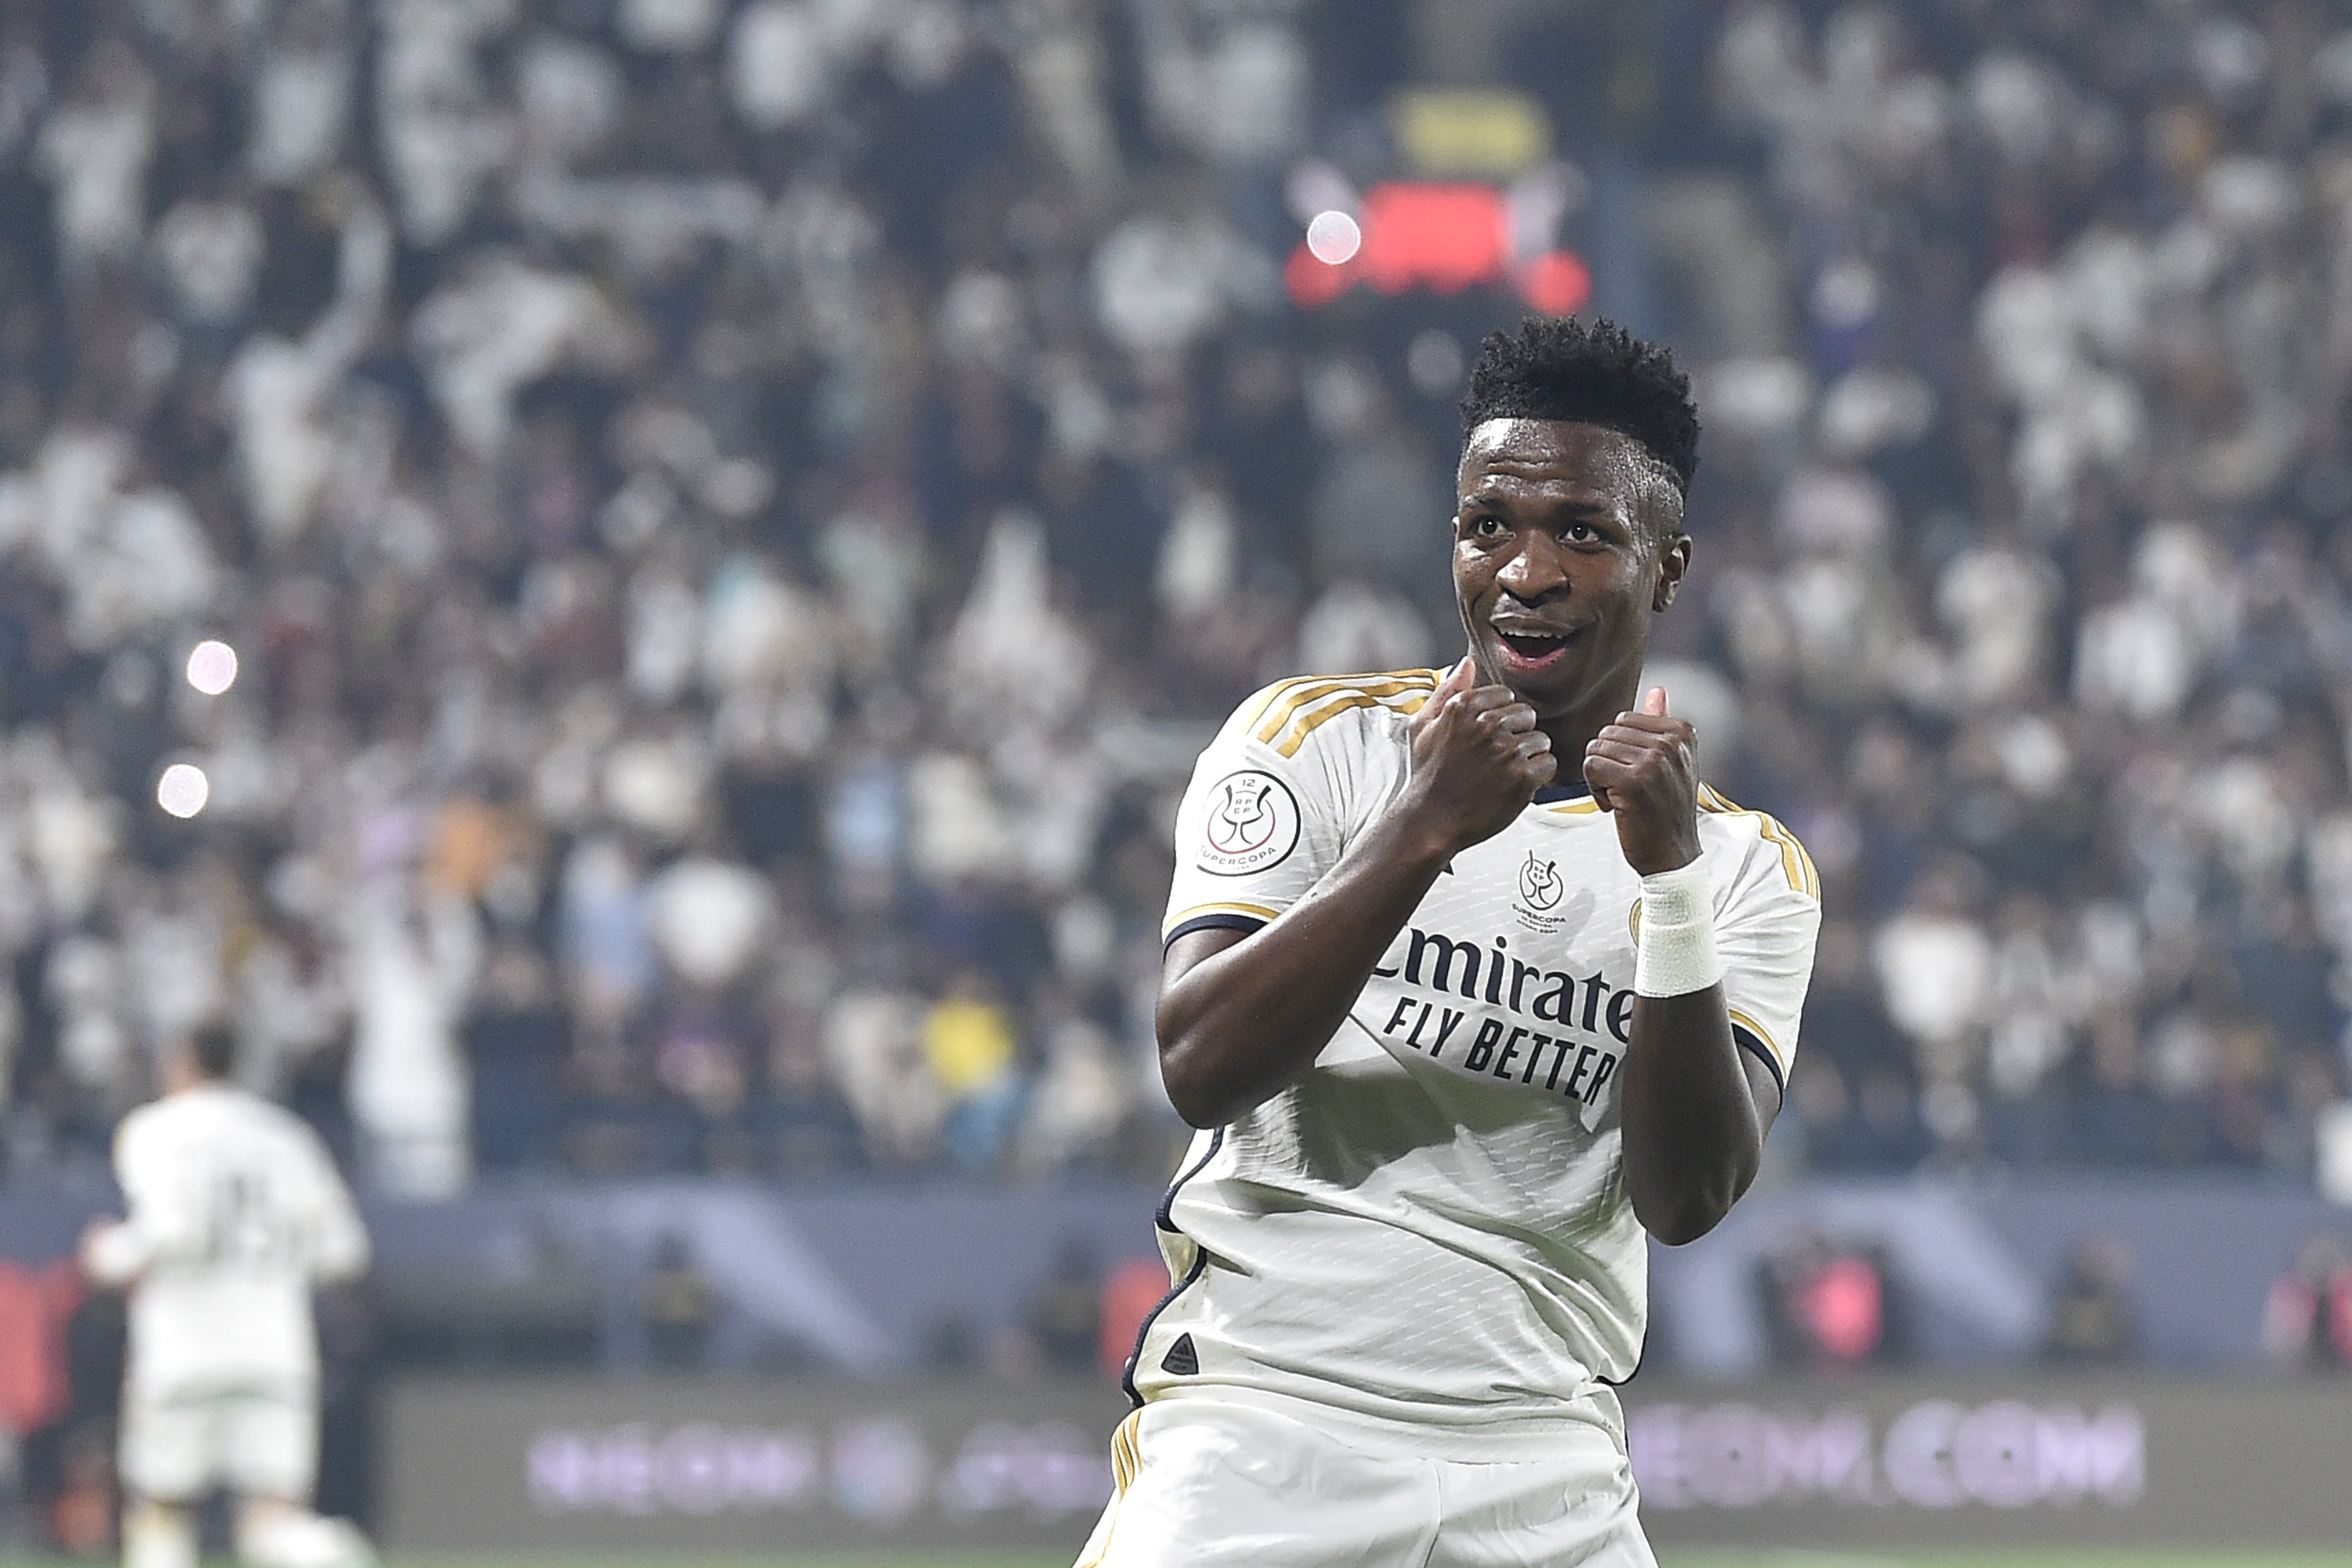 Vinícius nets hat trick as Real Madrid beats Barcelona 4-1 to win Spanish  Super Cup in Saudi Arabia